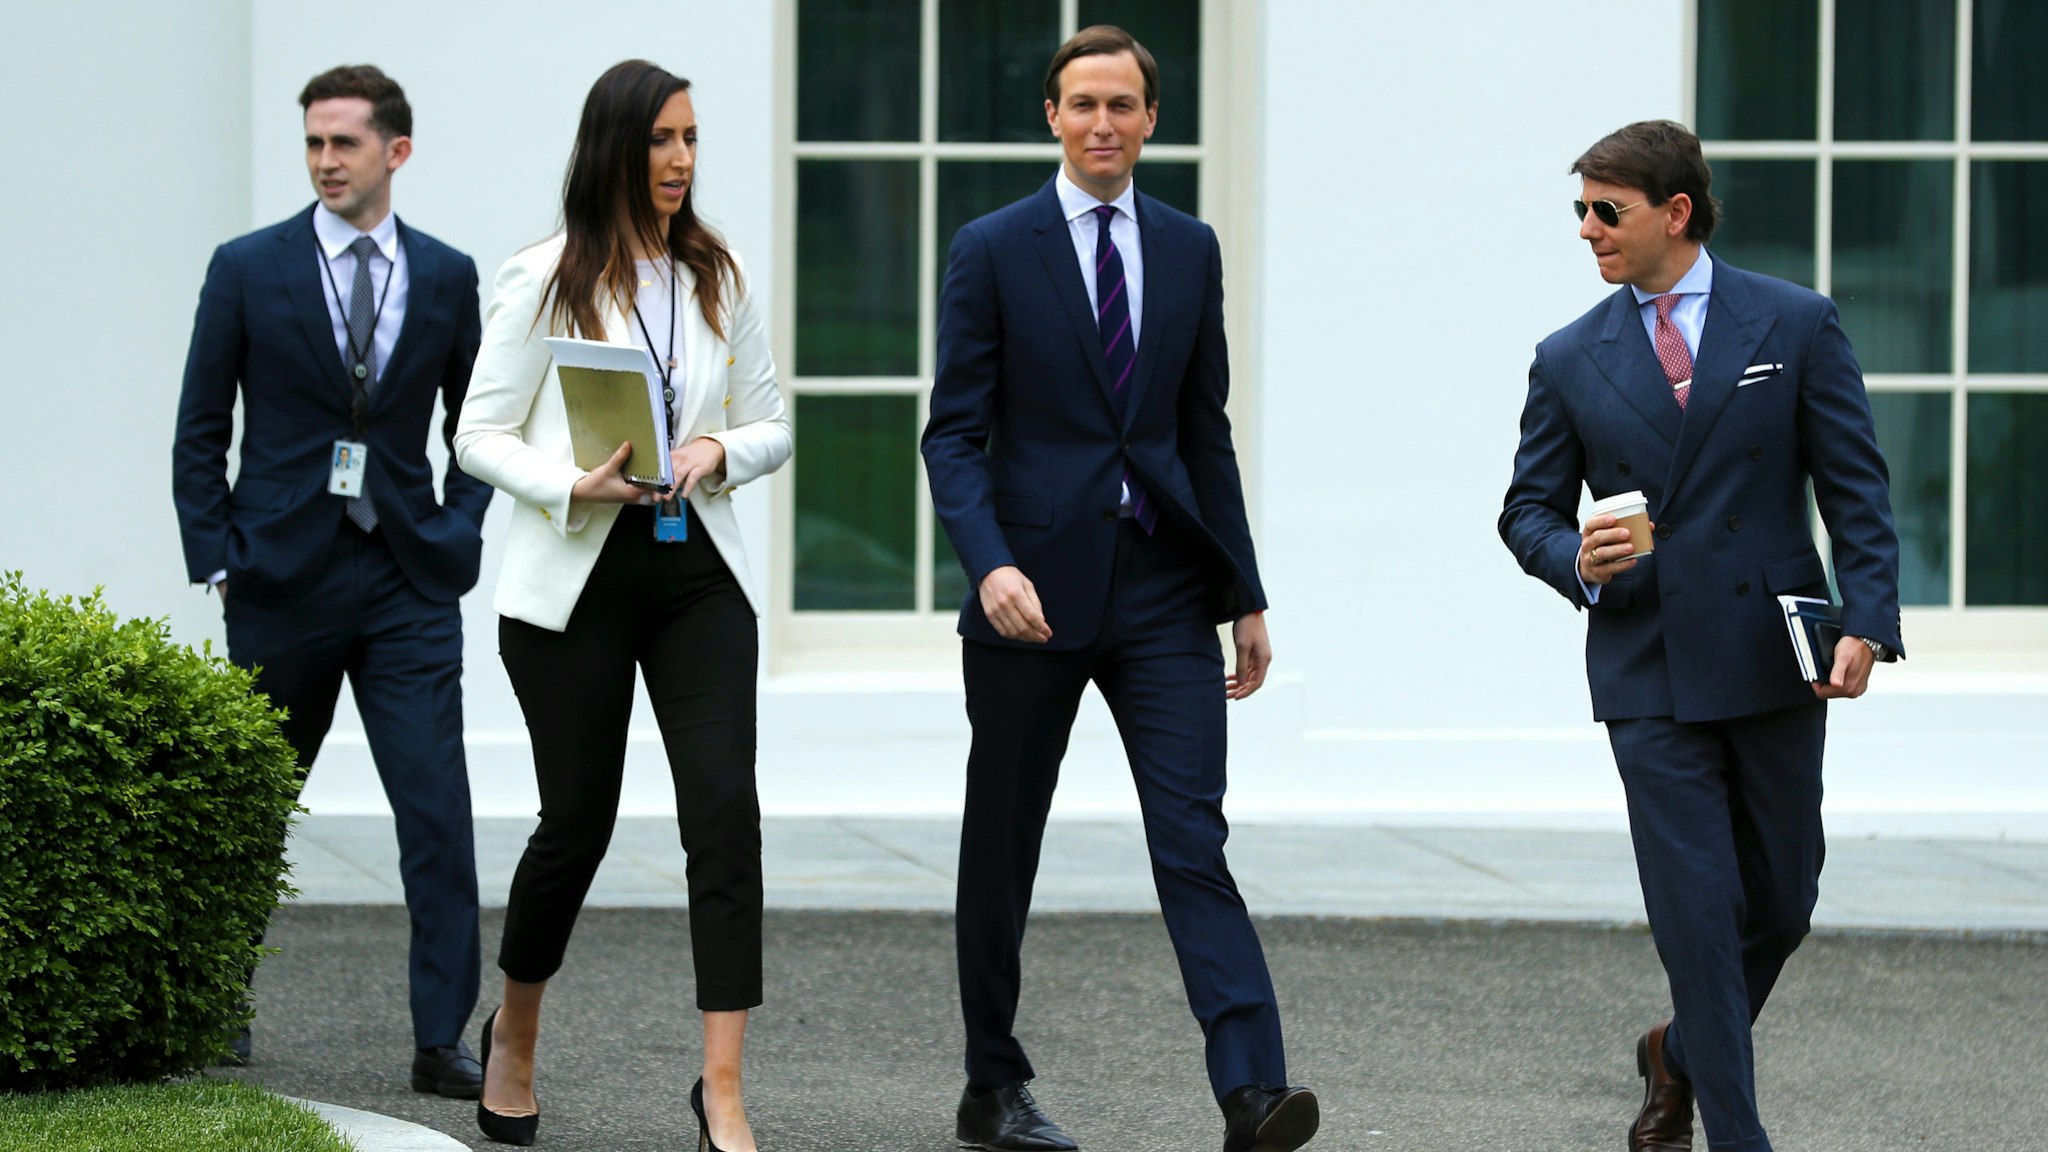 WASHINGTON, DC - MAY 08: (L-R) Assistant to the President and Special Representative for International Negotiations Avi Berkowitz, Special Assistant to the President Alexa Henning, Senior Advisor to President Donald Trump and son-in-law Jared Kushner and White House Deputy Press Secretary Hogan Gidley walk out of the West Wing on the morning that the Labor Department announced that more than 20 million people lost their jobs in April due to the novel coronavirus pandemic May 08, 2020 in Washington, DC. "There is a lot of heartbreak and hardship in those numbers," White House Economic Council Director Larry Kudlow said.